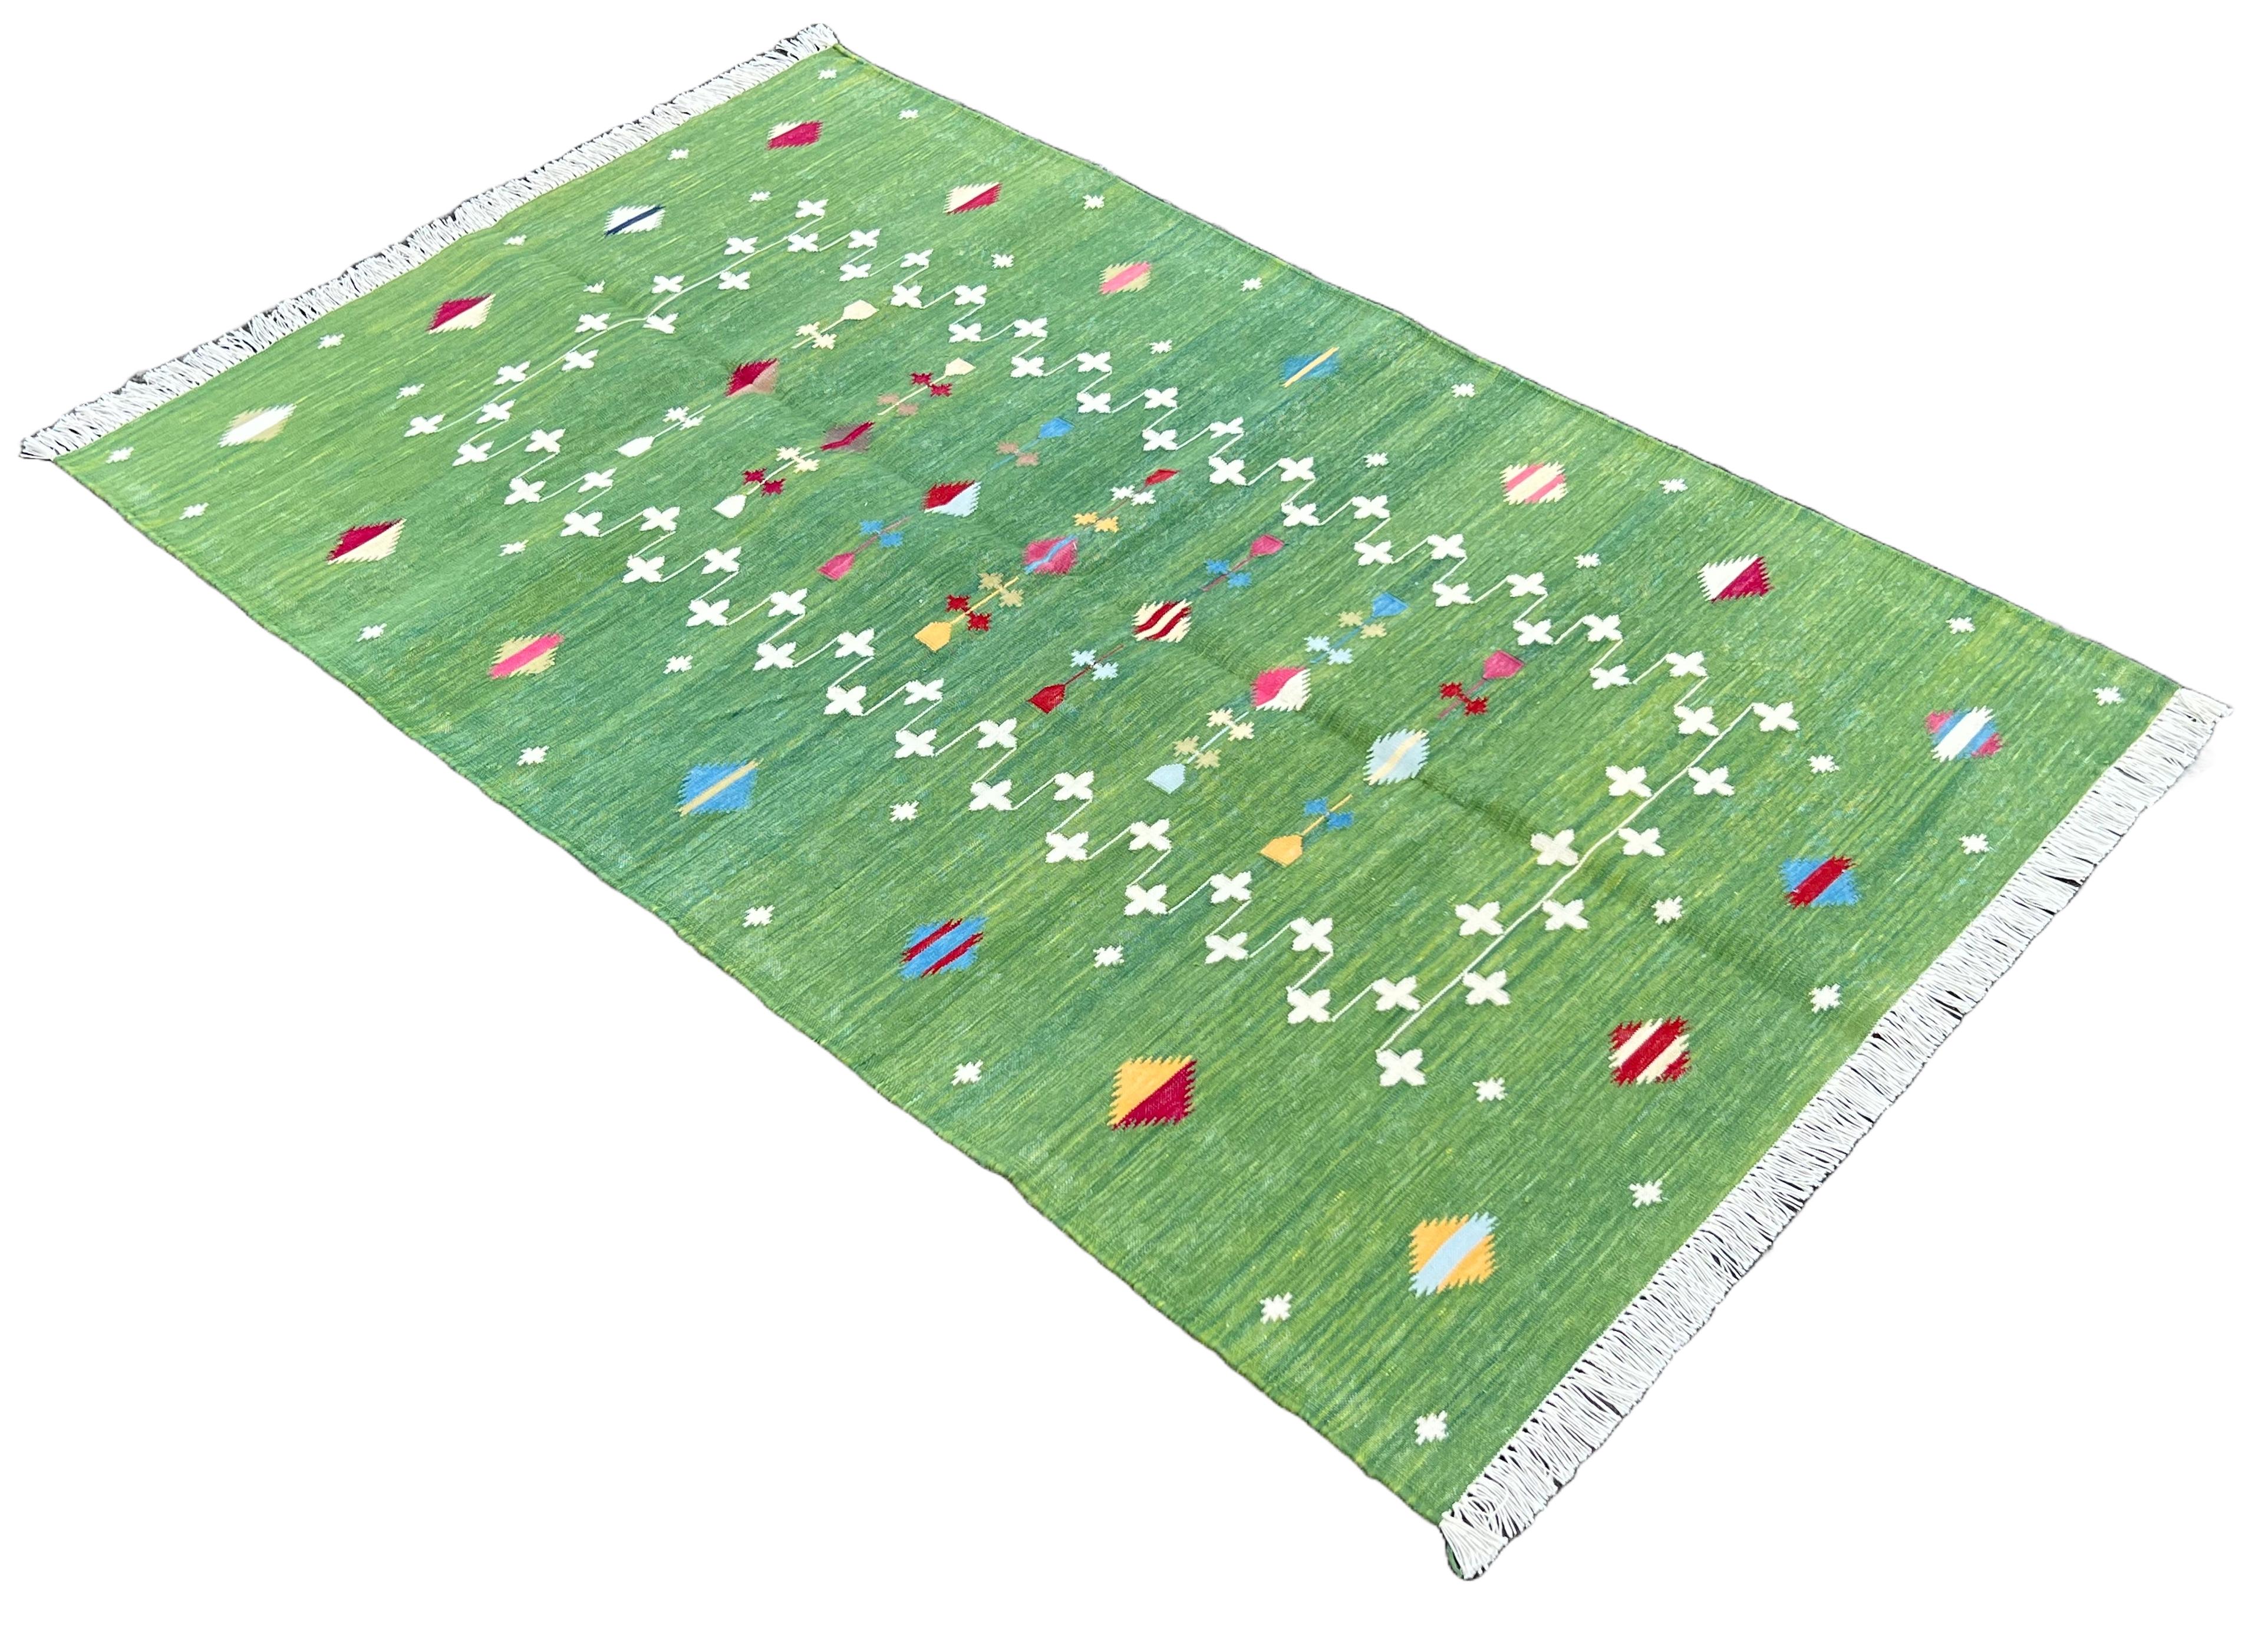 Cotton Vegetable Dyed Forest Green & White Shooting Star Rug-3'x5'
These special flat-weave dhurries are hand-woven with 15 ply 100% cotton yarn. Due to the special manufacturing techniques used to create our rugs, the size and color of each piece